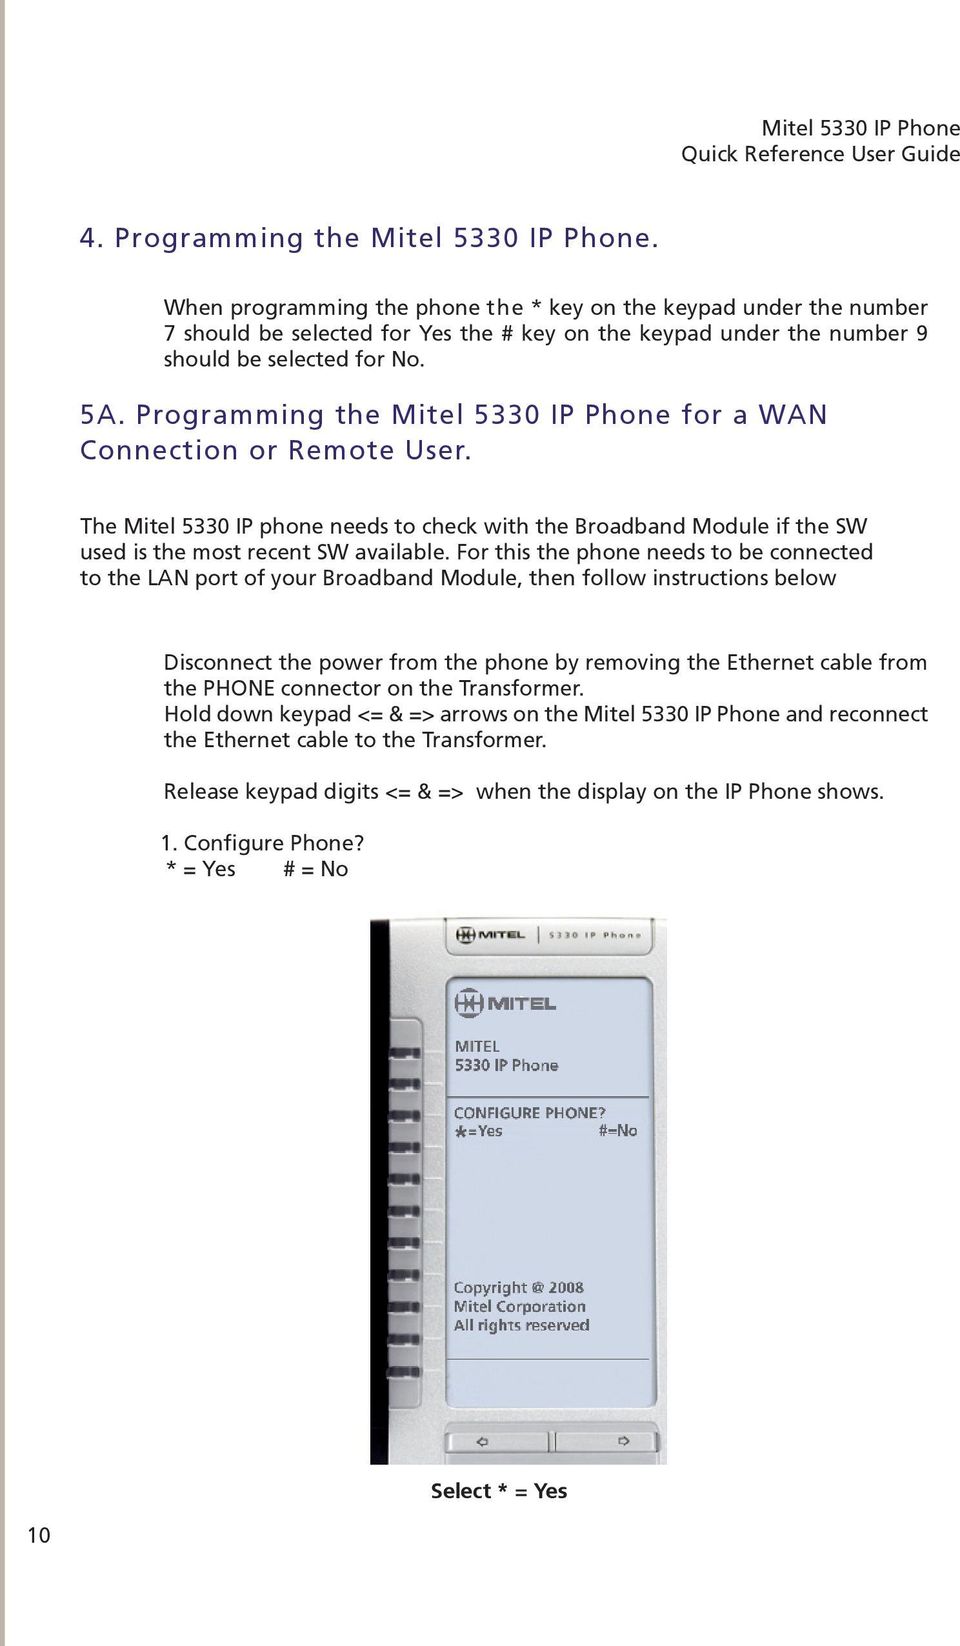 Programming the Mitel 5330 IP Phone for a WAN Connection or Remote User. The Mitel 5330 IP phone needs to check with the Broadband Module if the SW used is the most recent SW available.